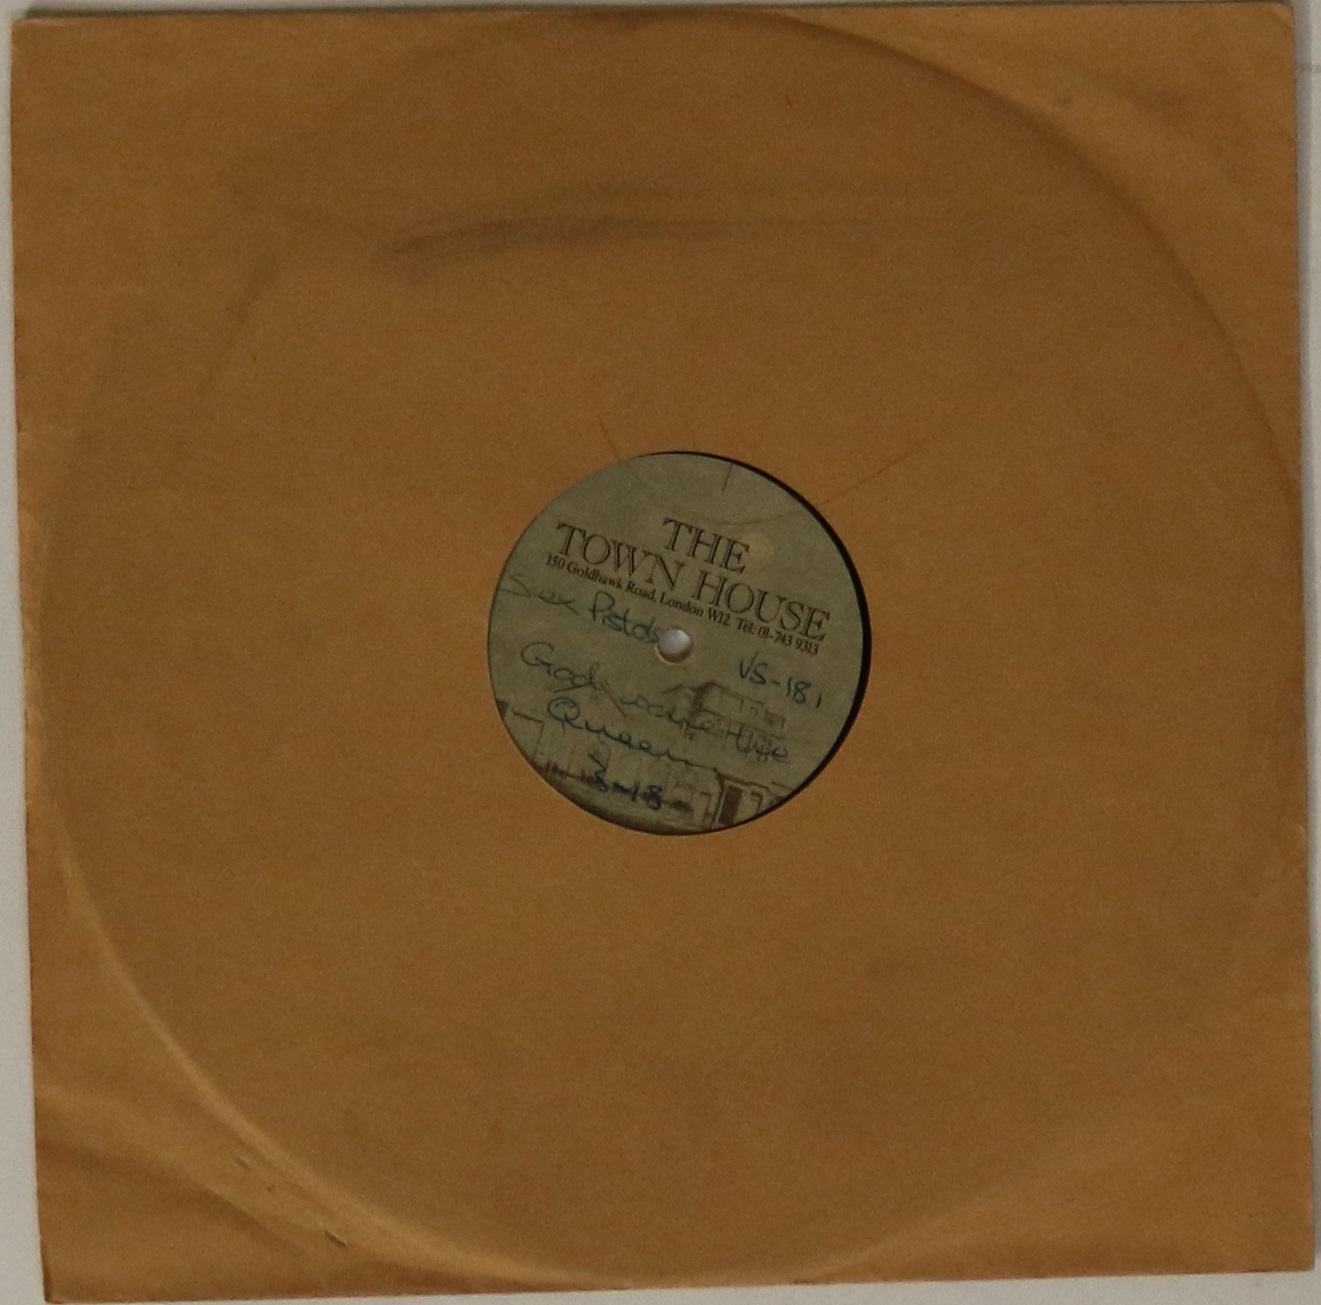 THE SEX PISTOLS - GOD SAVE THE QUEEN - TOWNHOUSE 10" ACETATE - Unbelievable chance to bid on this - Image 2 of 4